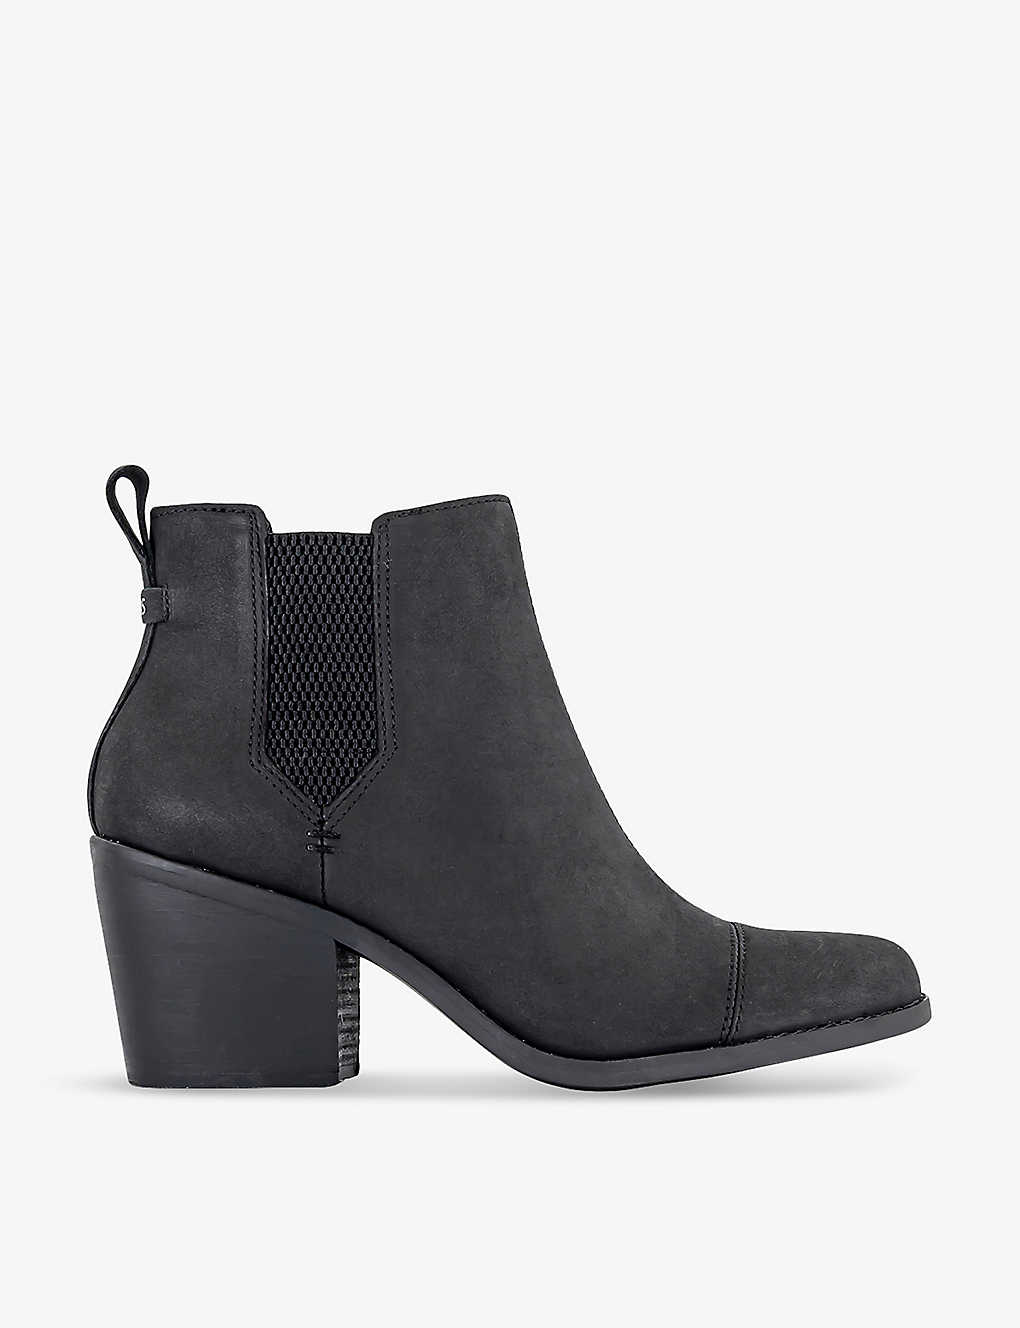 TOMS TOMS WOMENS BLACK OILED NUBUCK EVERLY ELASTICATED-SIDE LEATHER HEELED ANKLE BOOTS